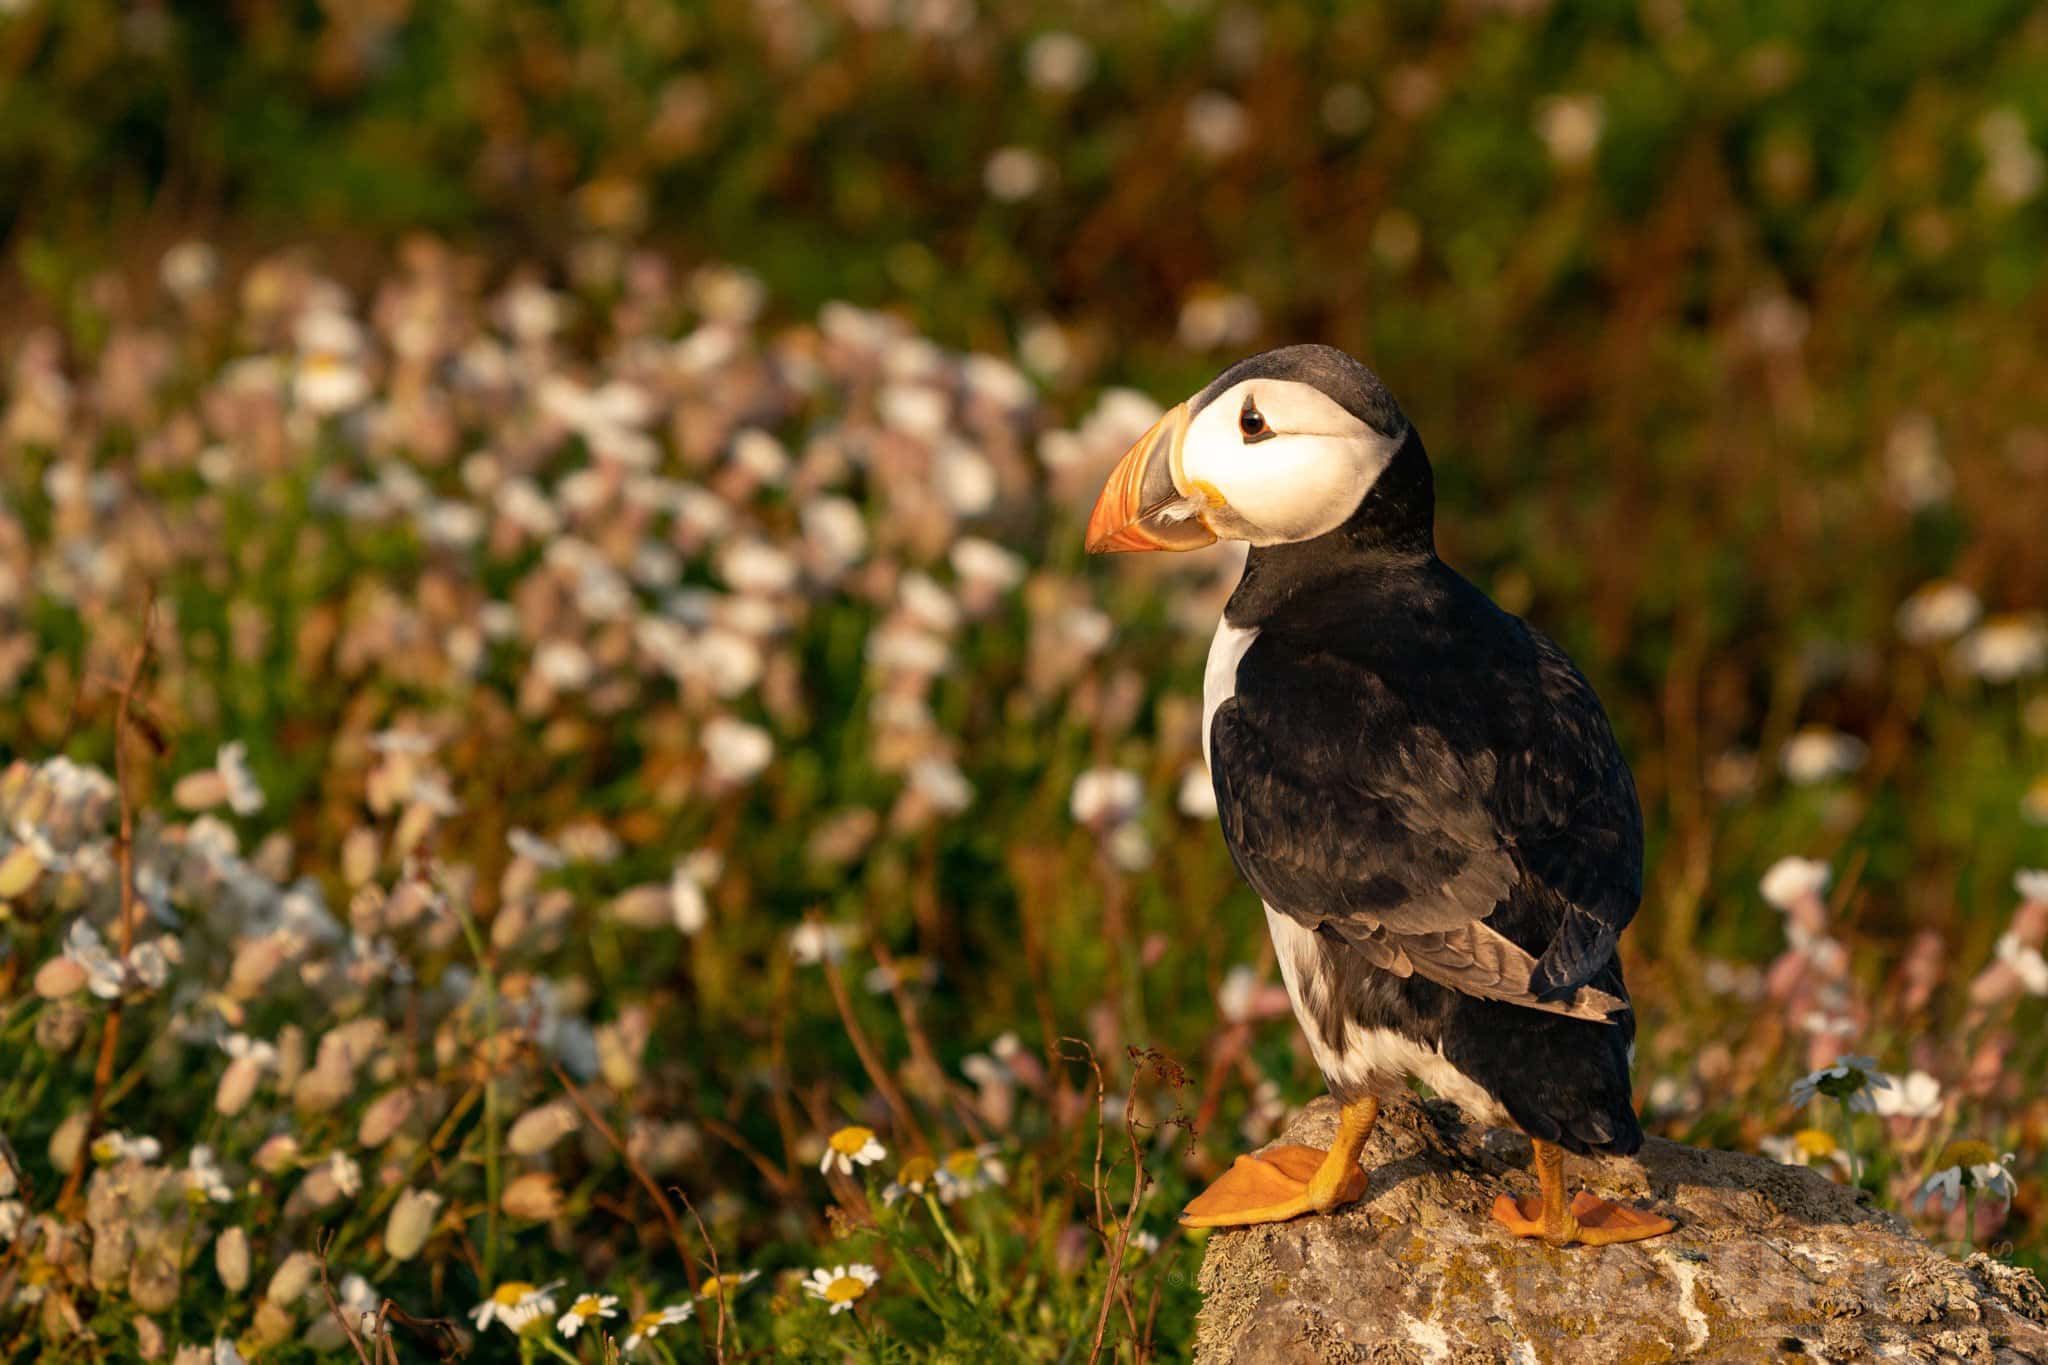 One Of The Atlantic Puffins Illuminated By The Evening Sun This Image Was Captured By Ian Roberts During The Natureslens Welsh Puffins Of Skomer Island Photography Holiday